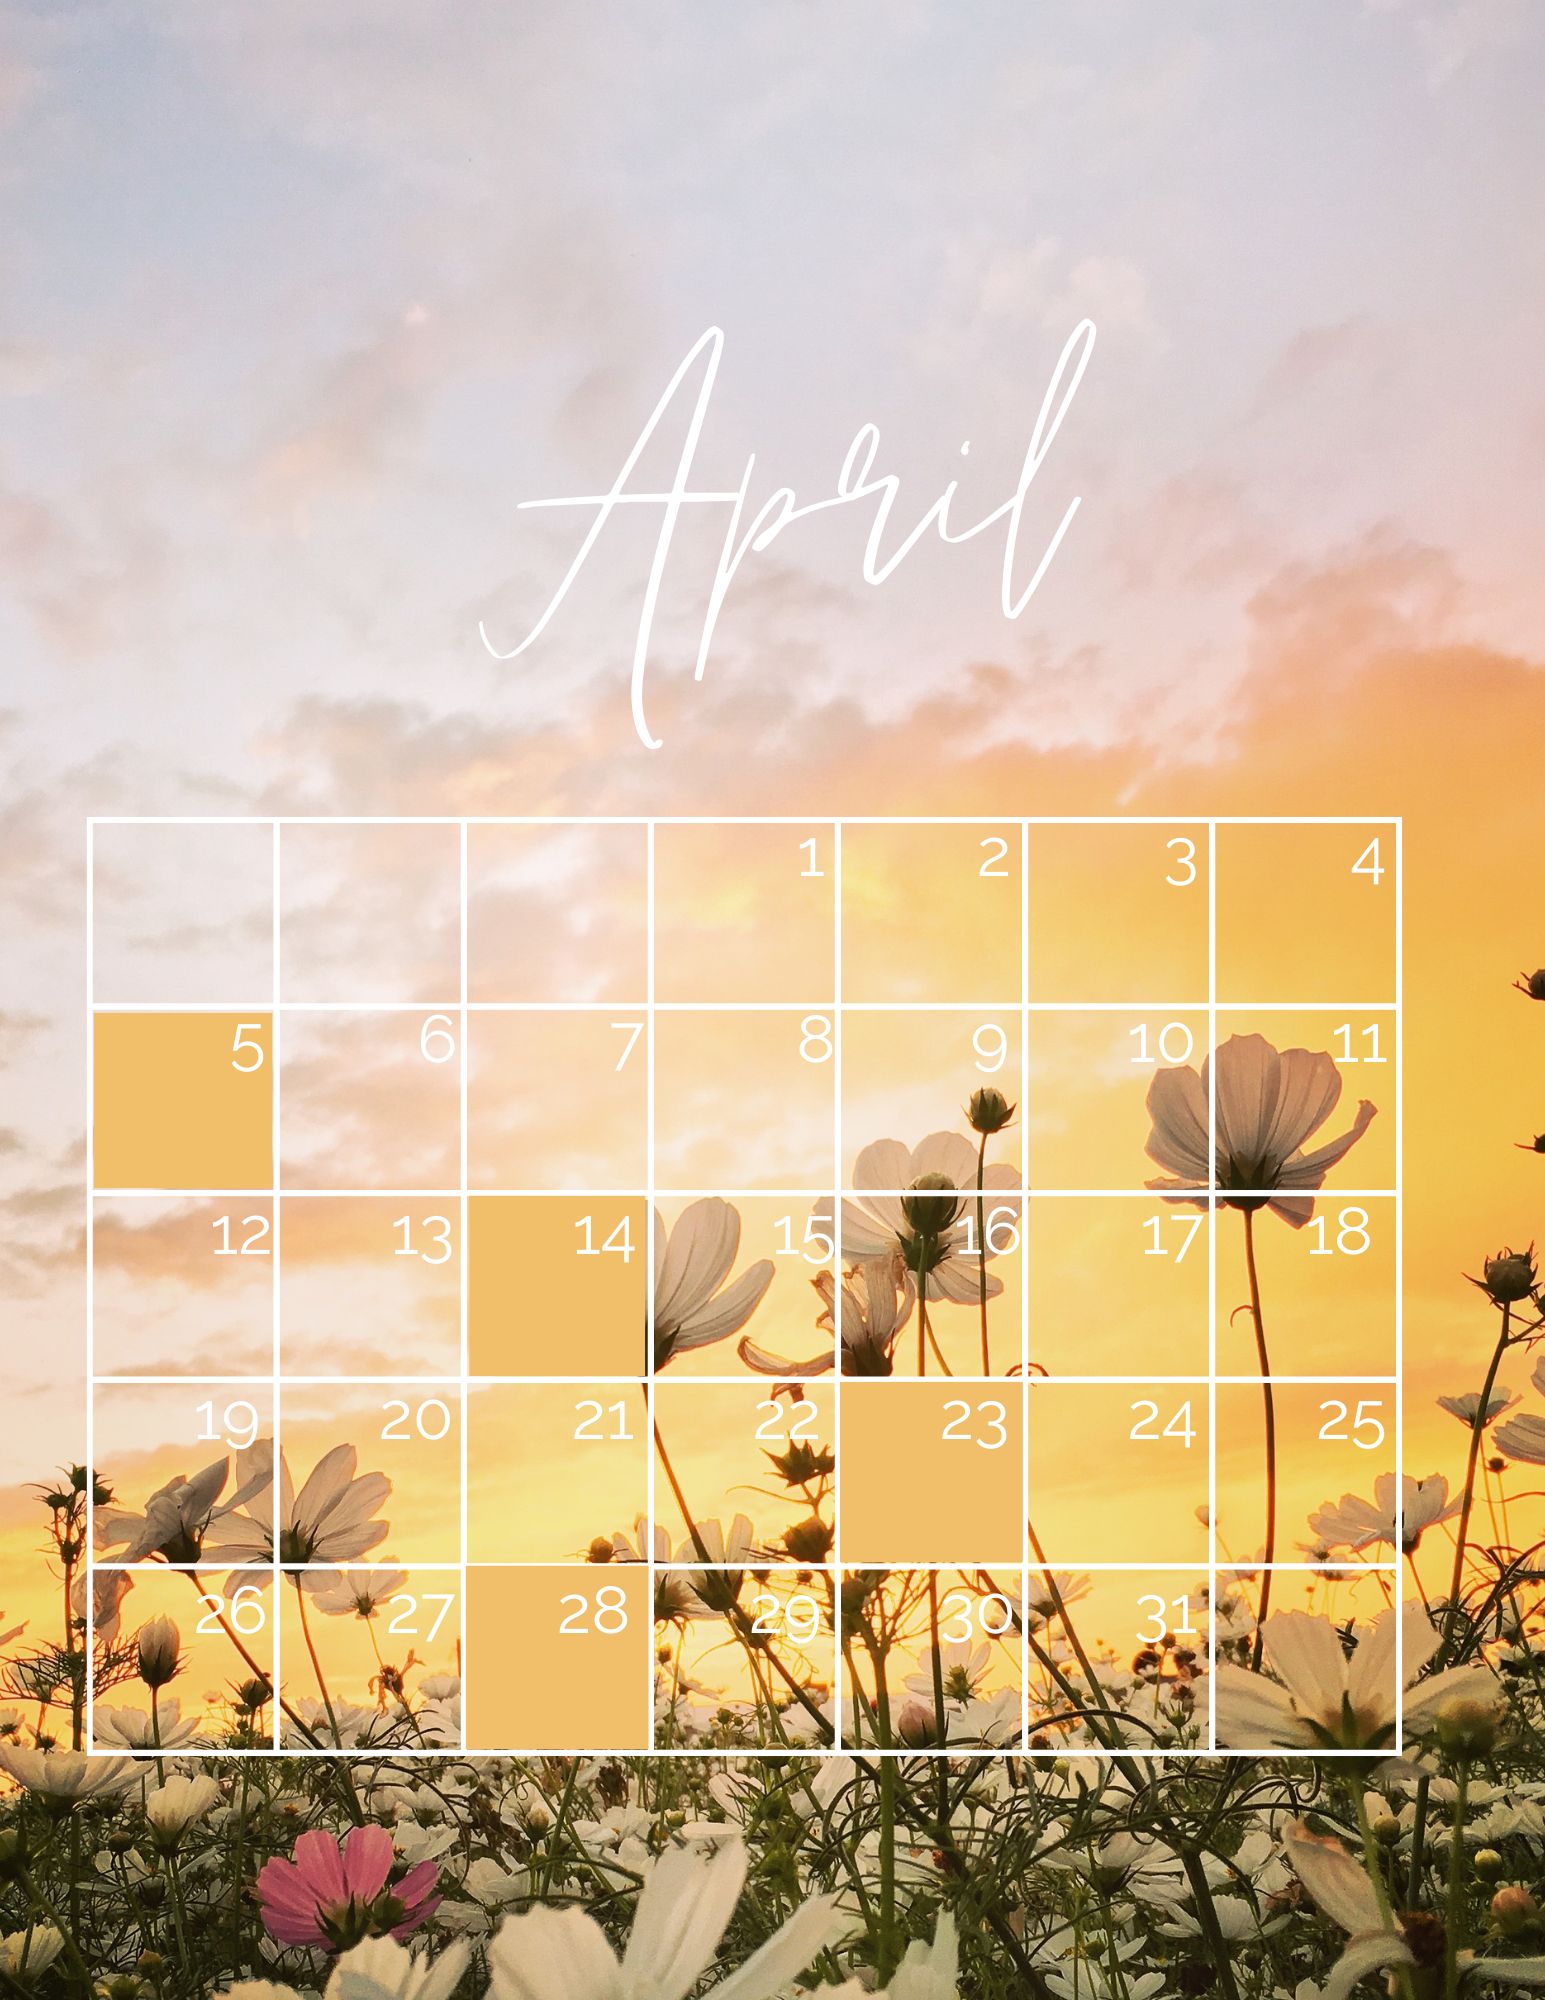 What To Do In April